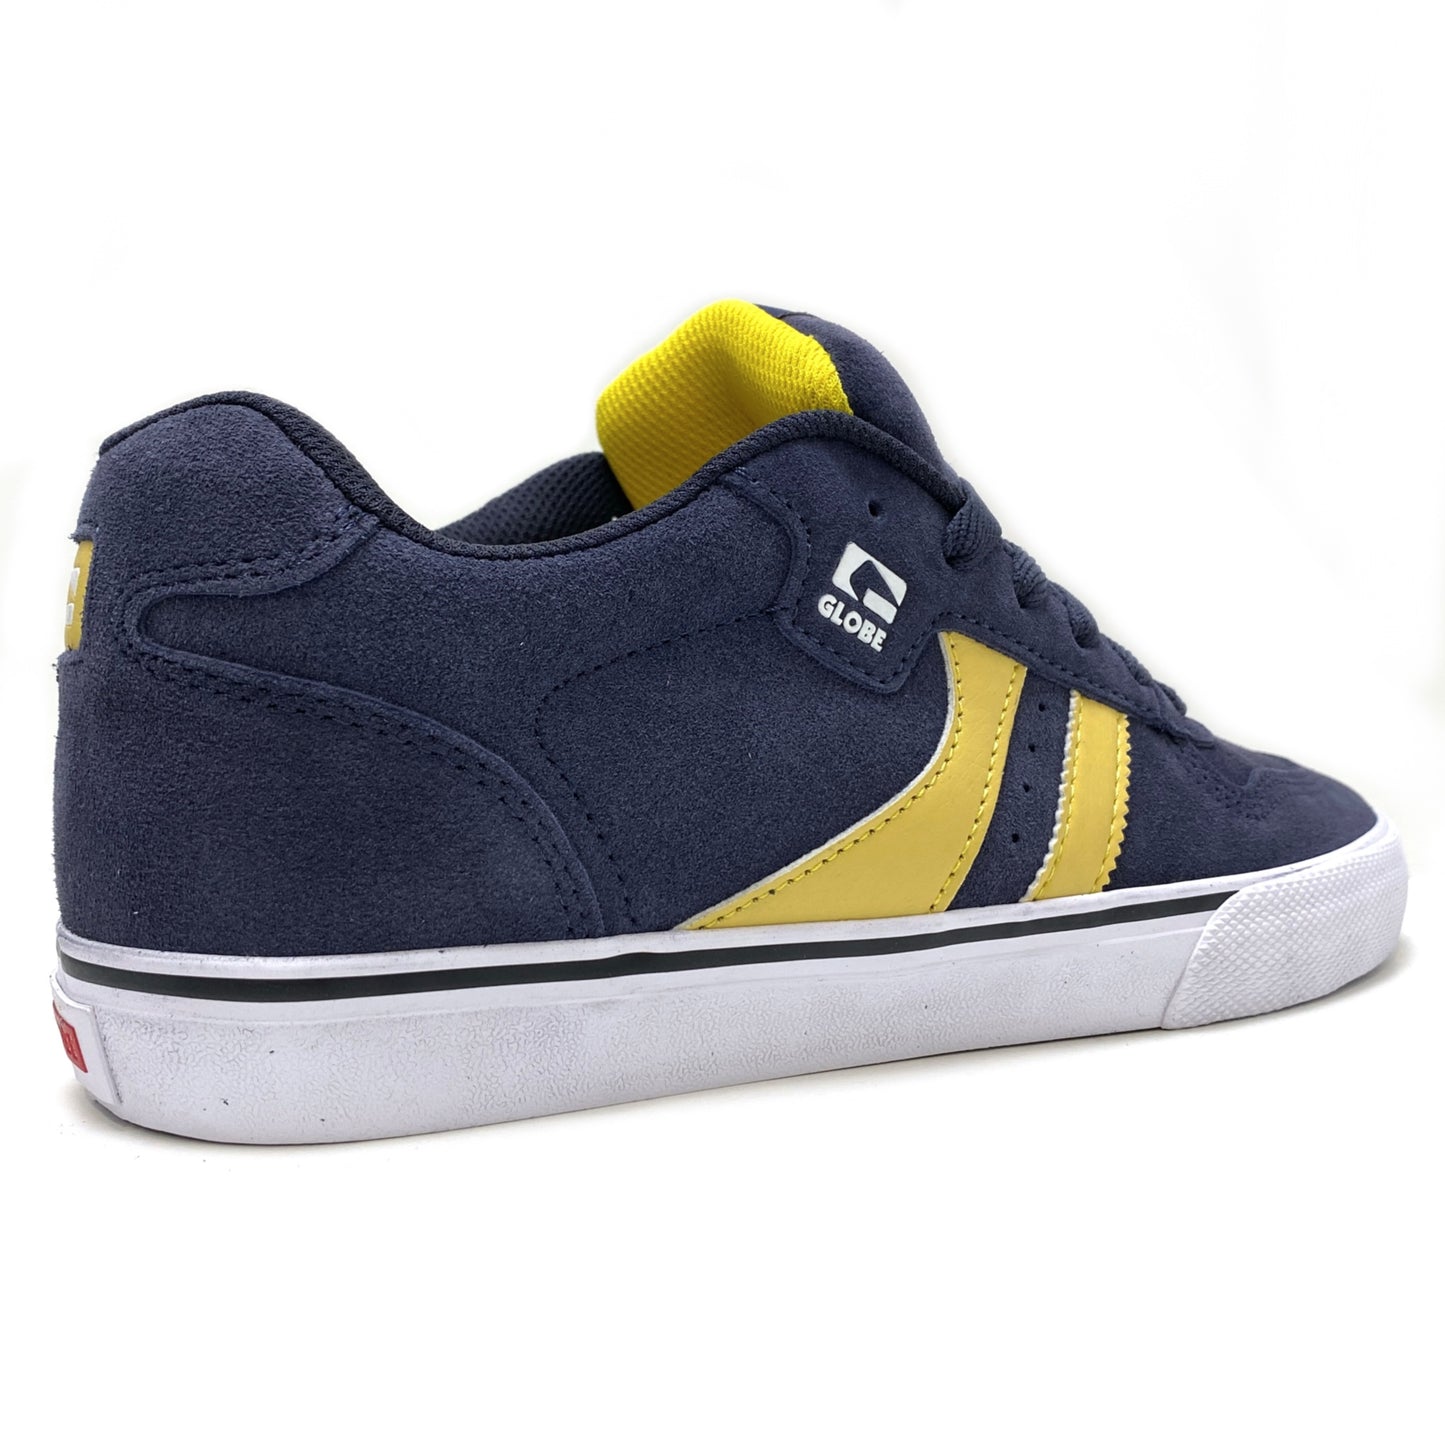 GLOBE ENCORE 2 NAVY PALE YELLOW TRAINERS